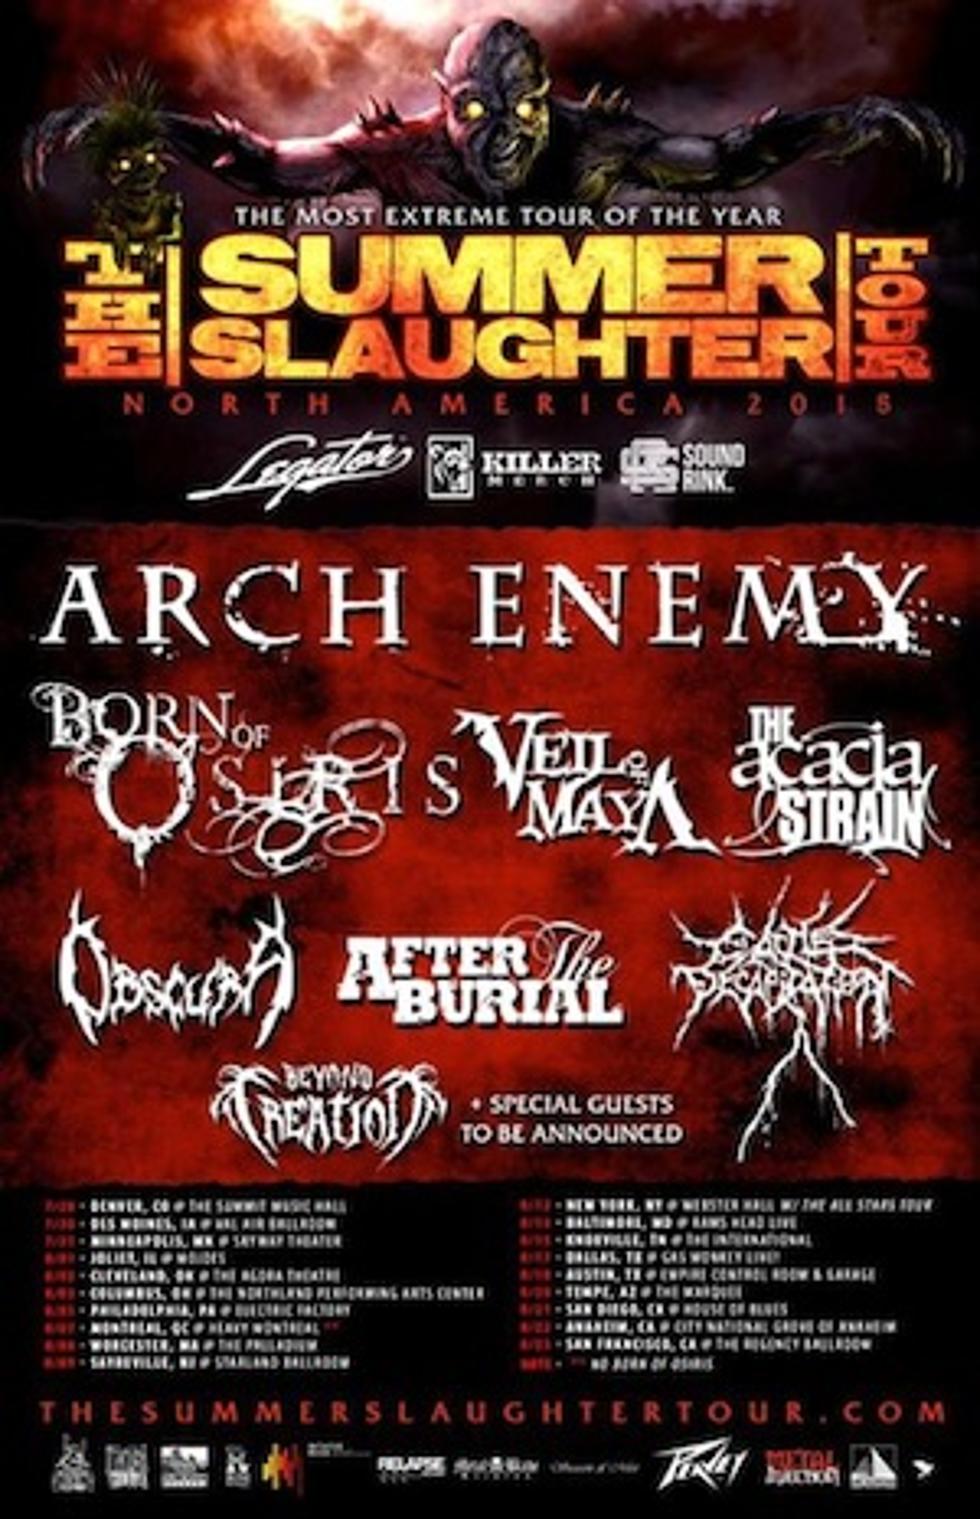 Arch Enemy, Born of Osiris, Veil of Maya + More Announced for 2015 Summer Slaughter Tour